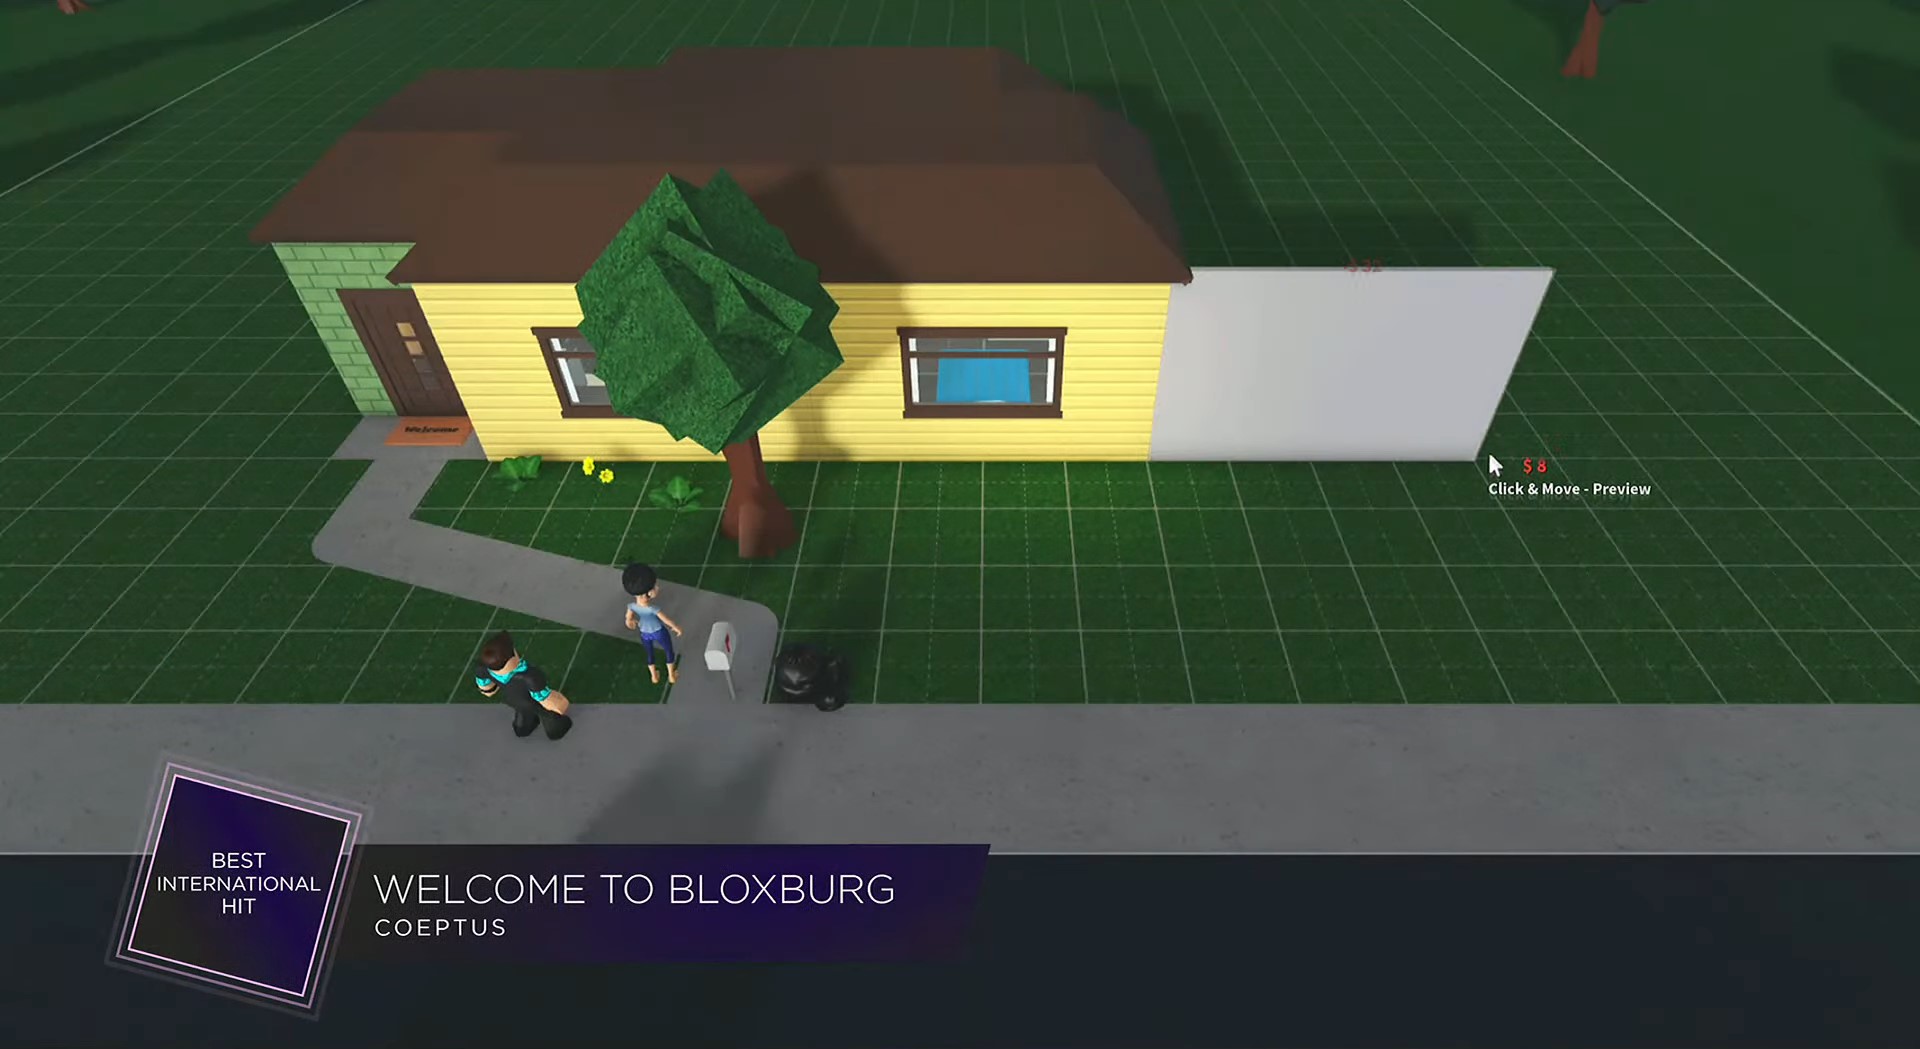 Roblox Innovation Awards 2022 celebrates best creations and games